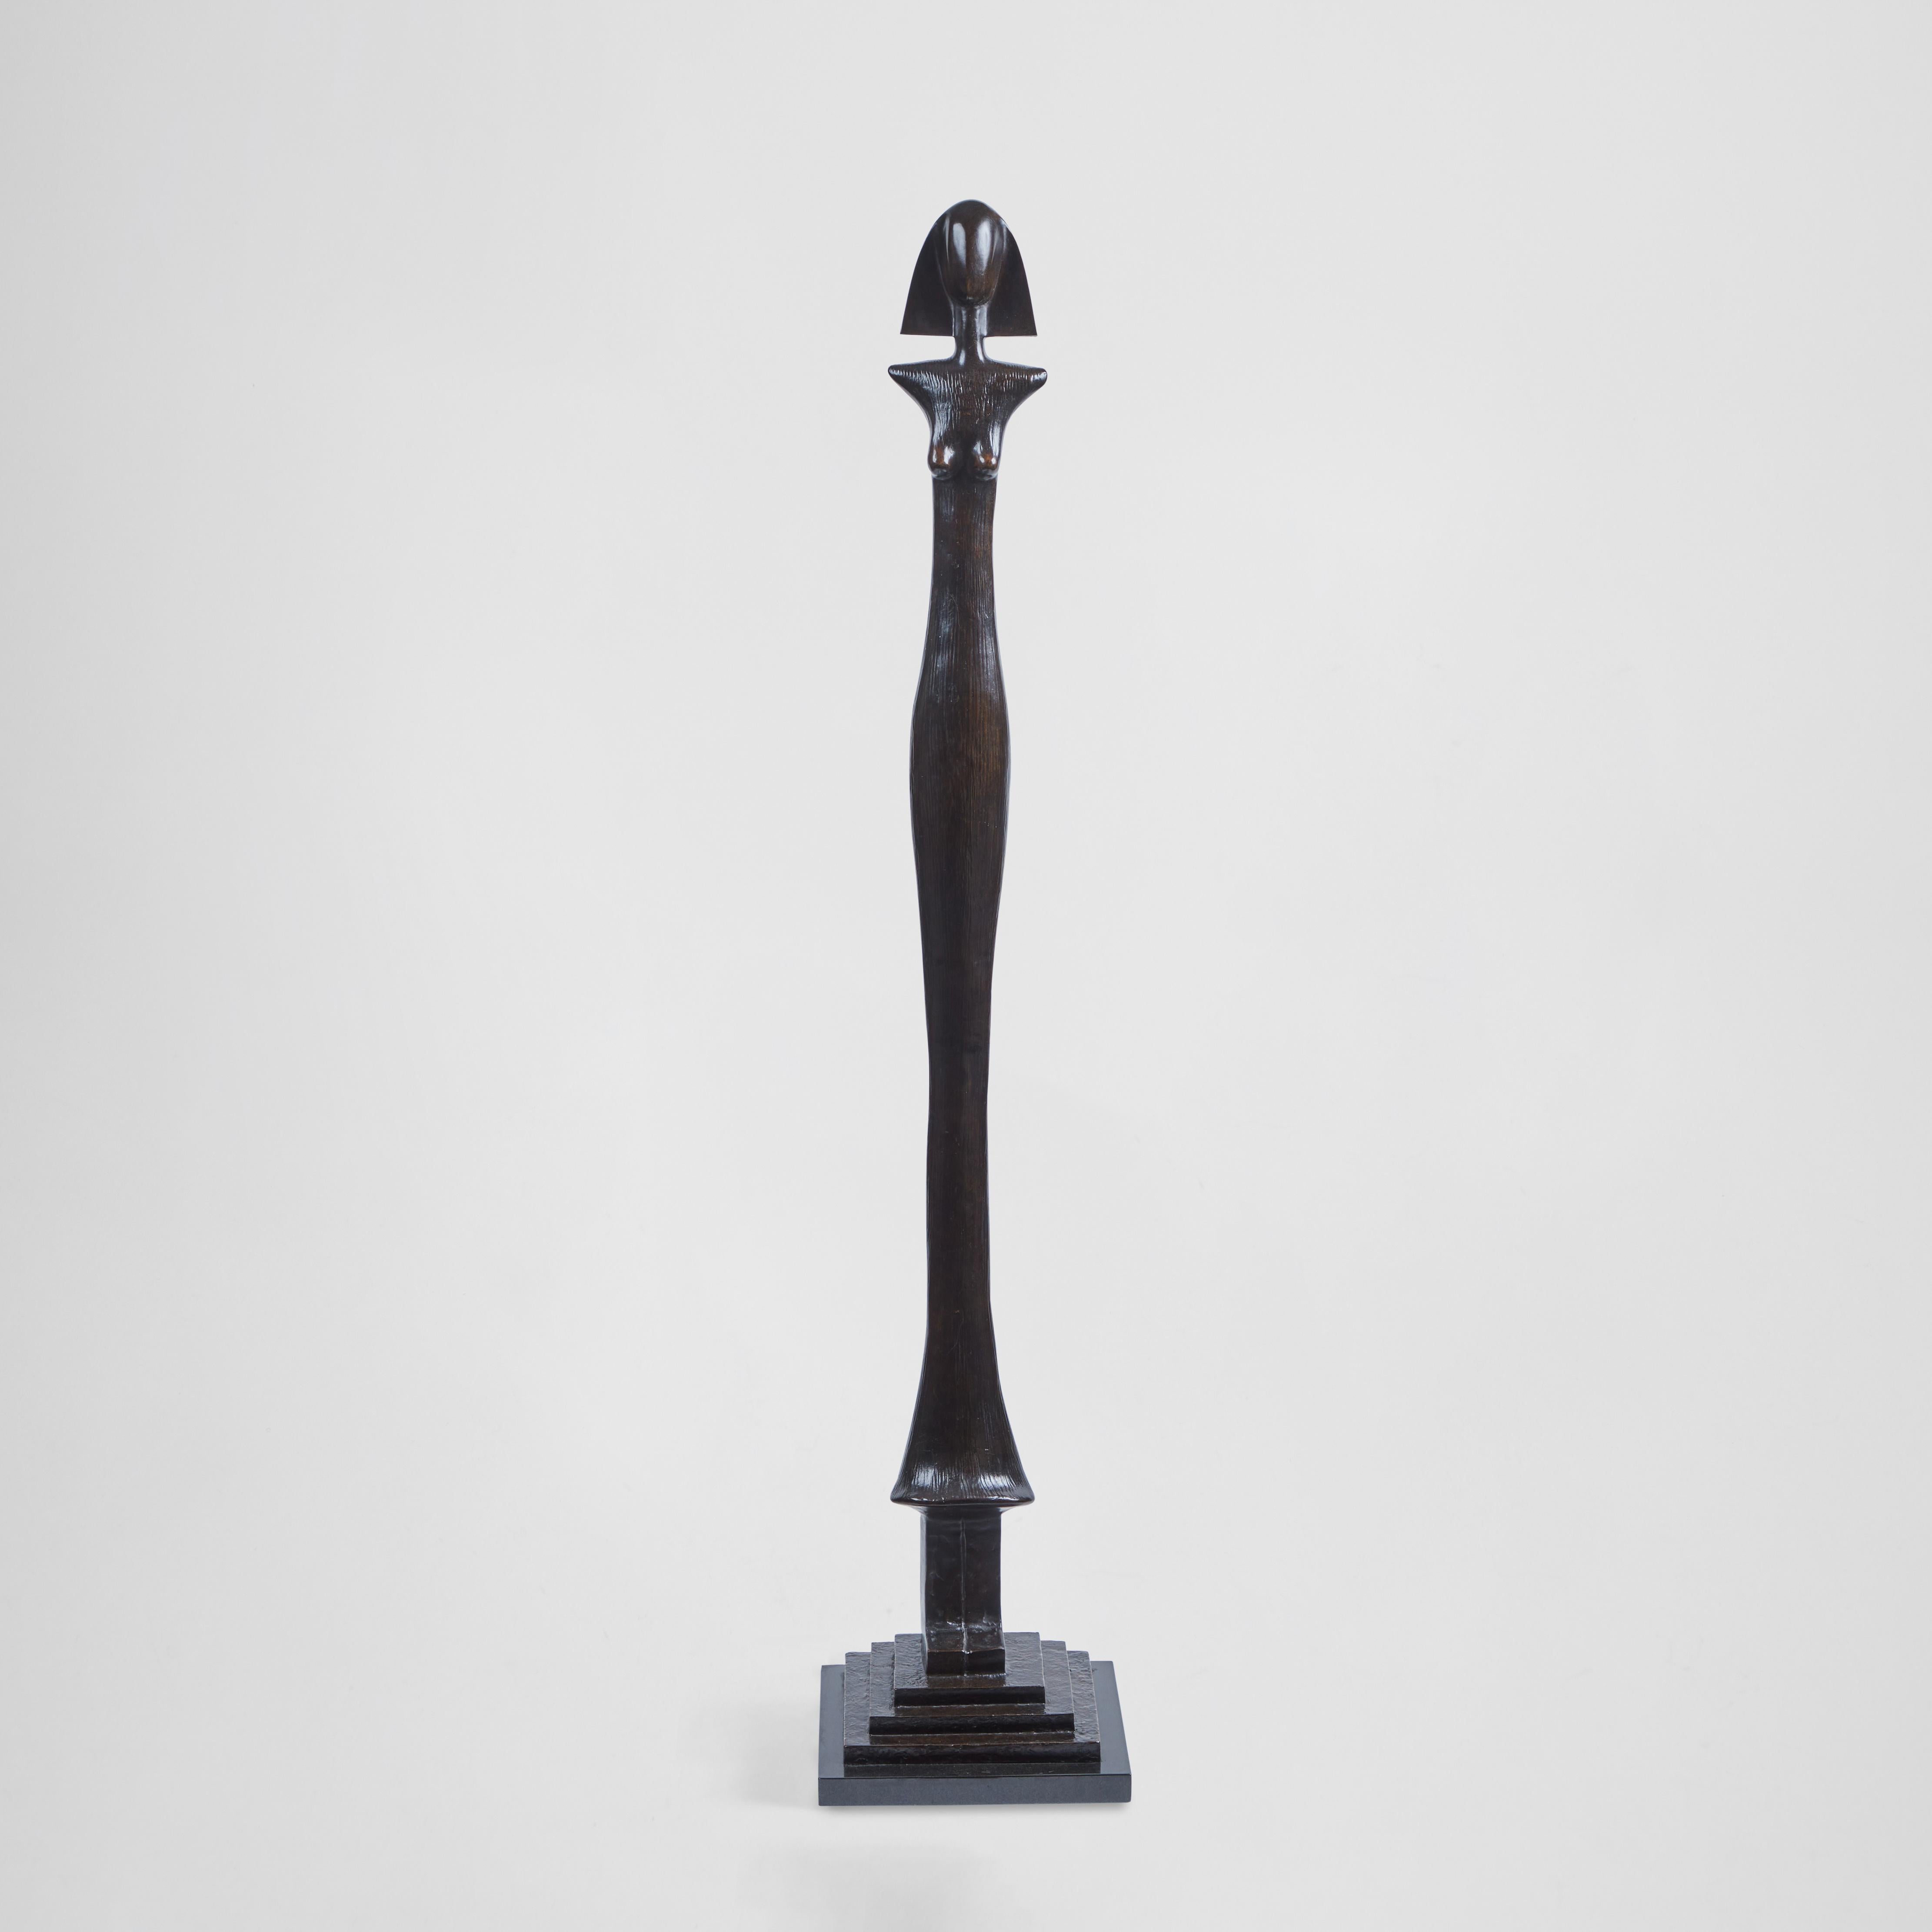 Tall, elegant Art Deco inspired bronze sculpture in the manner of Giacometti. The sculpture is stamped EXNY on the base. This sculpture was cast by the Excalibur Foundry in New York. The Excalibur Foundry retains all the original castings from the